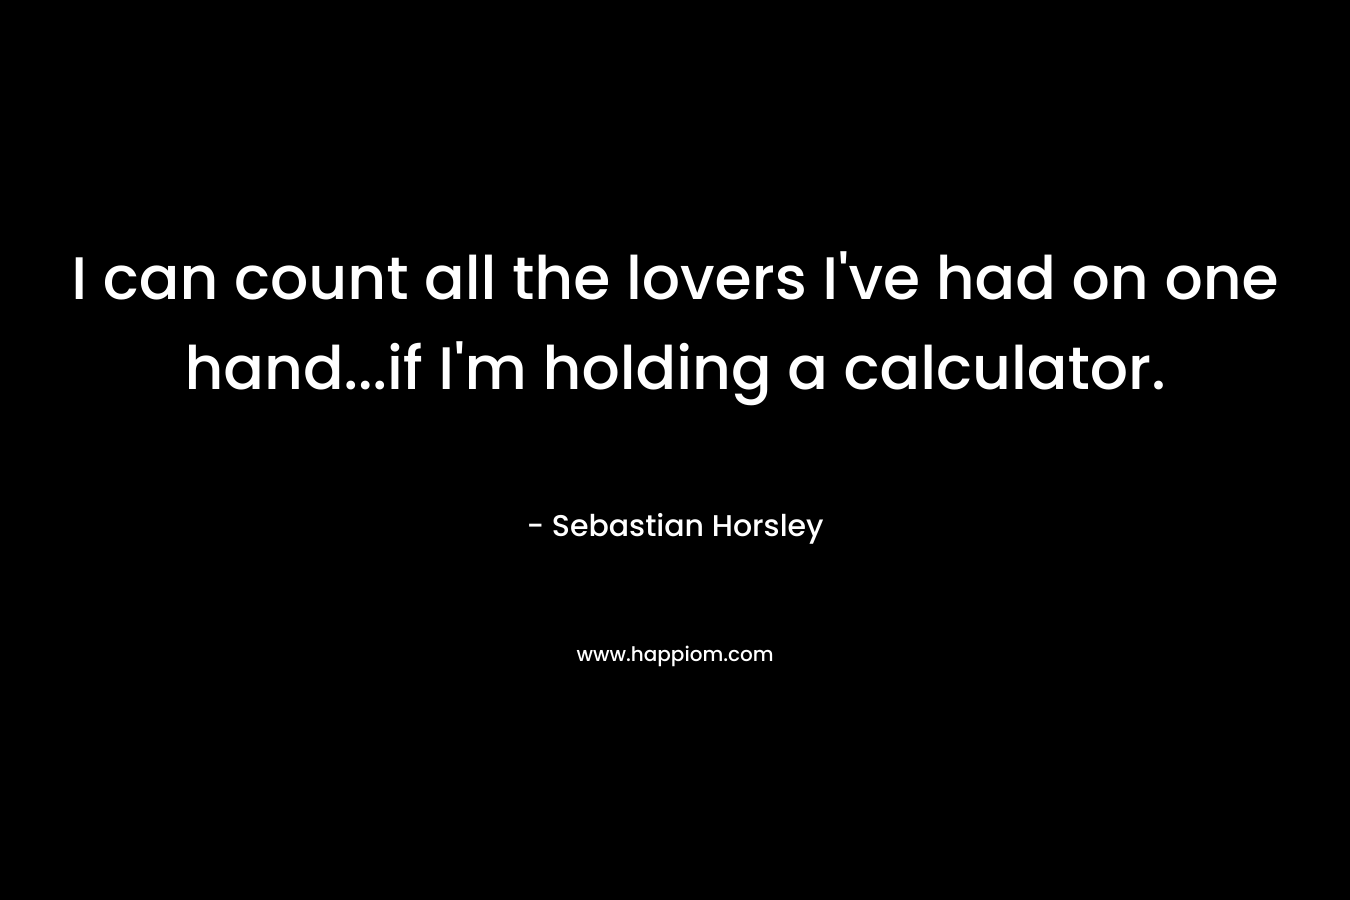 I can count all the lovers I've had on one hand...if I'm holding a calculator.